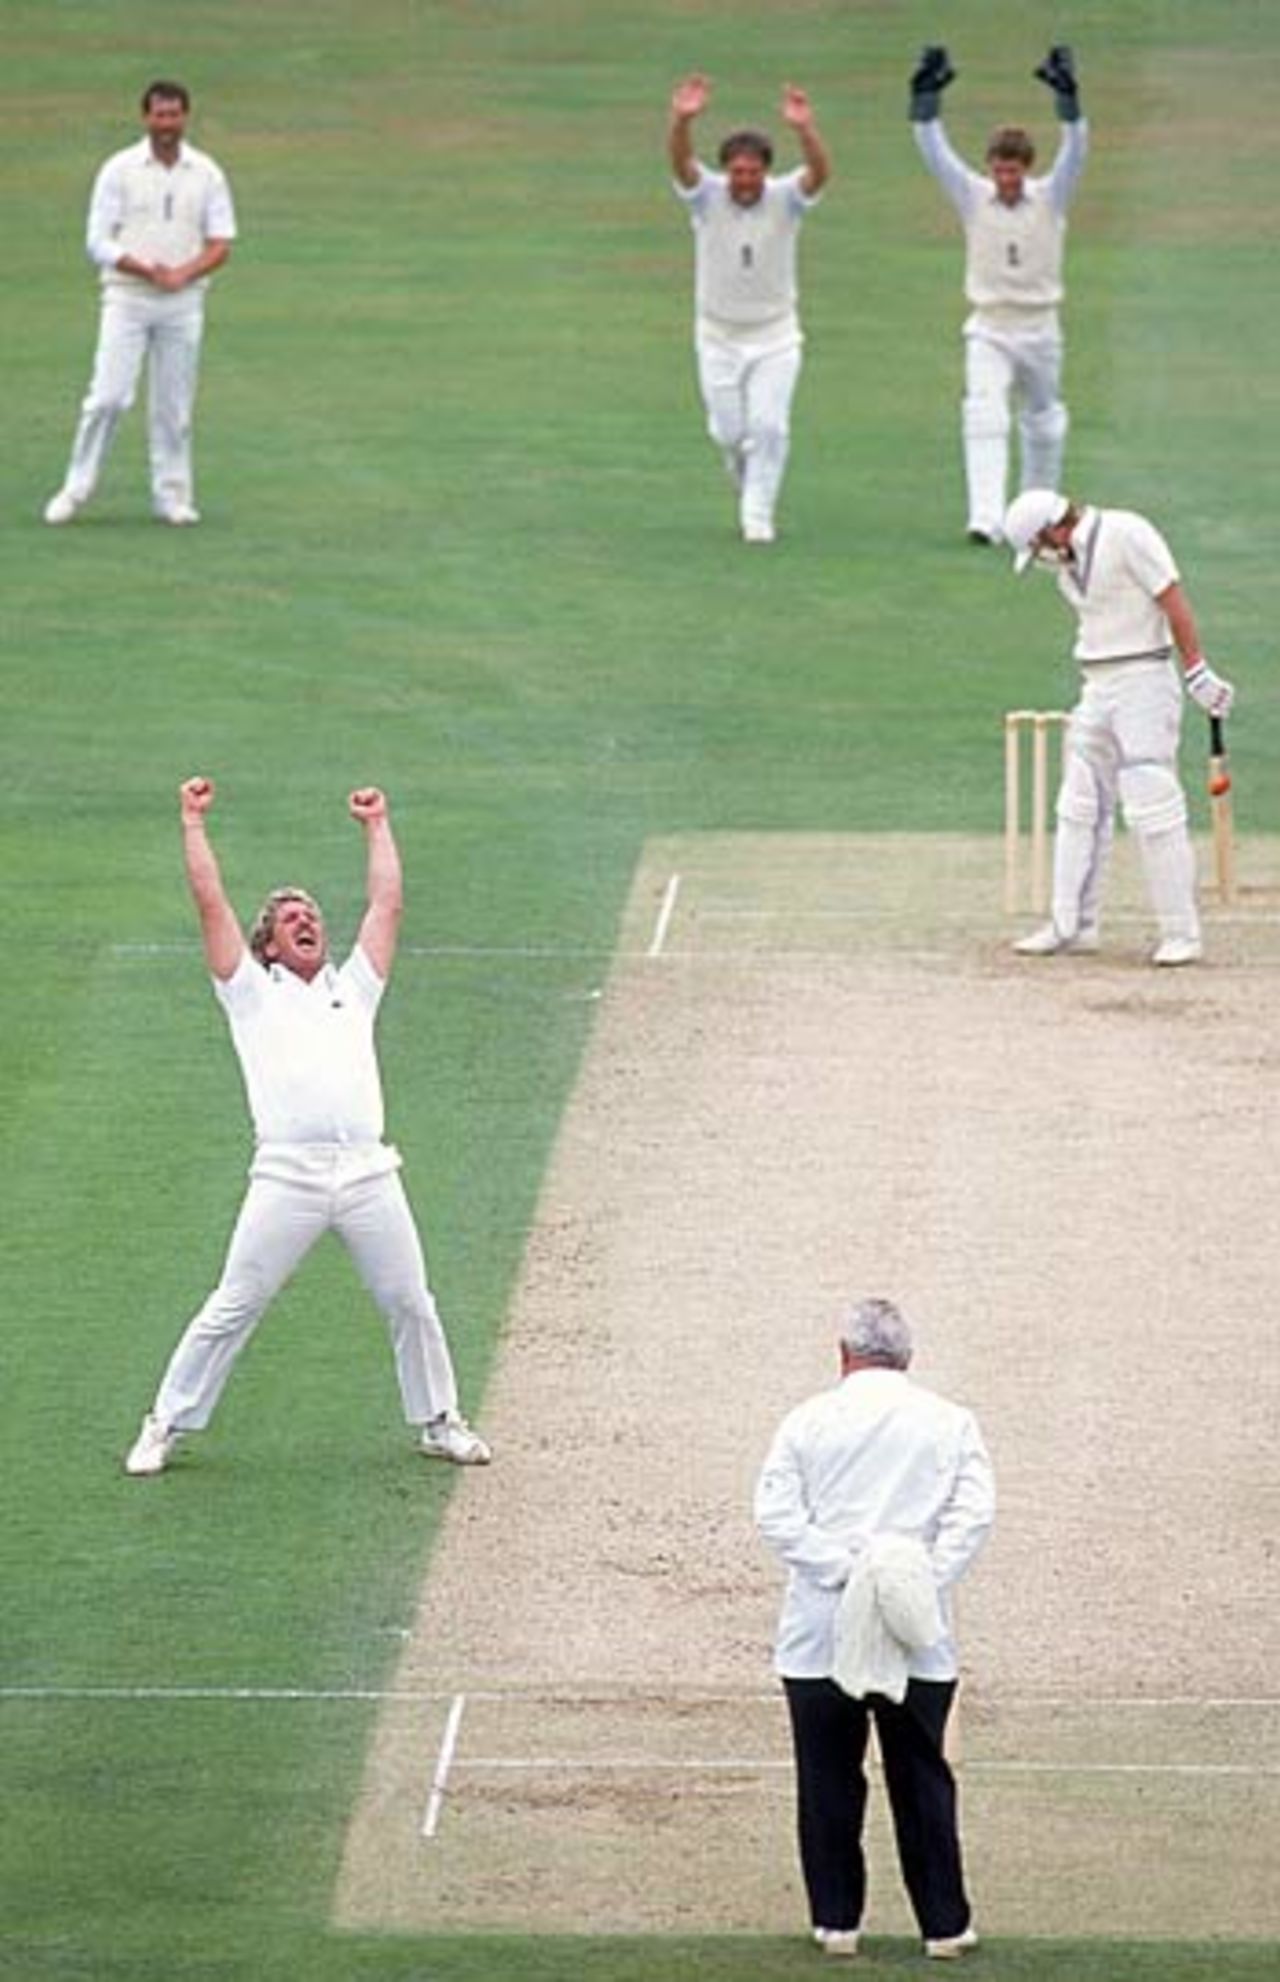 Ian Botham has Jeff Crowe lbw to equal the world record for Test wickets, England v New Zealand, 3rd Test, The Oval, August 21, 1986